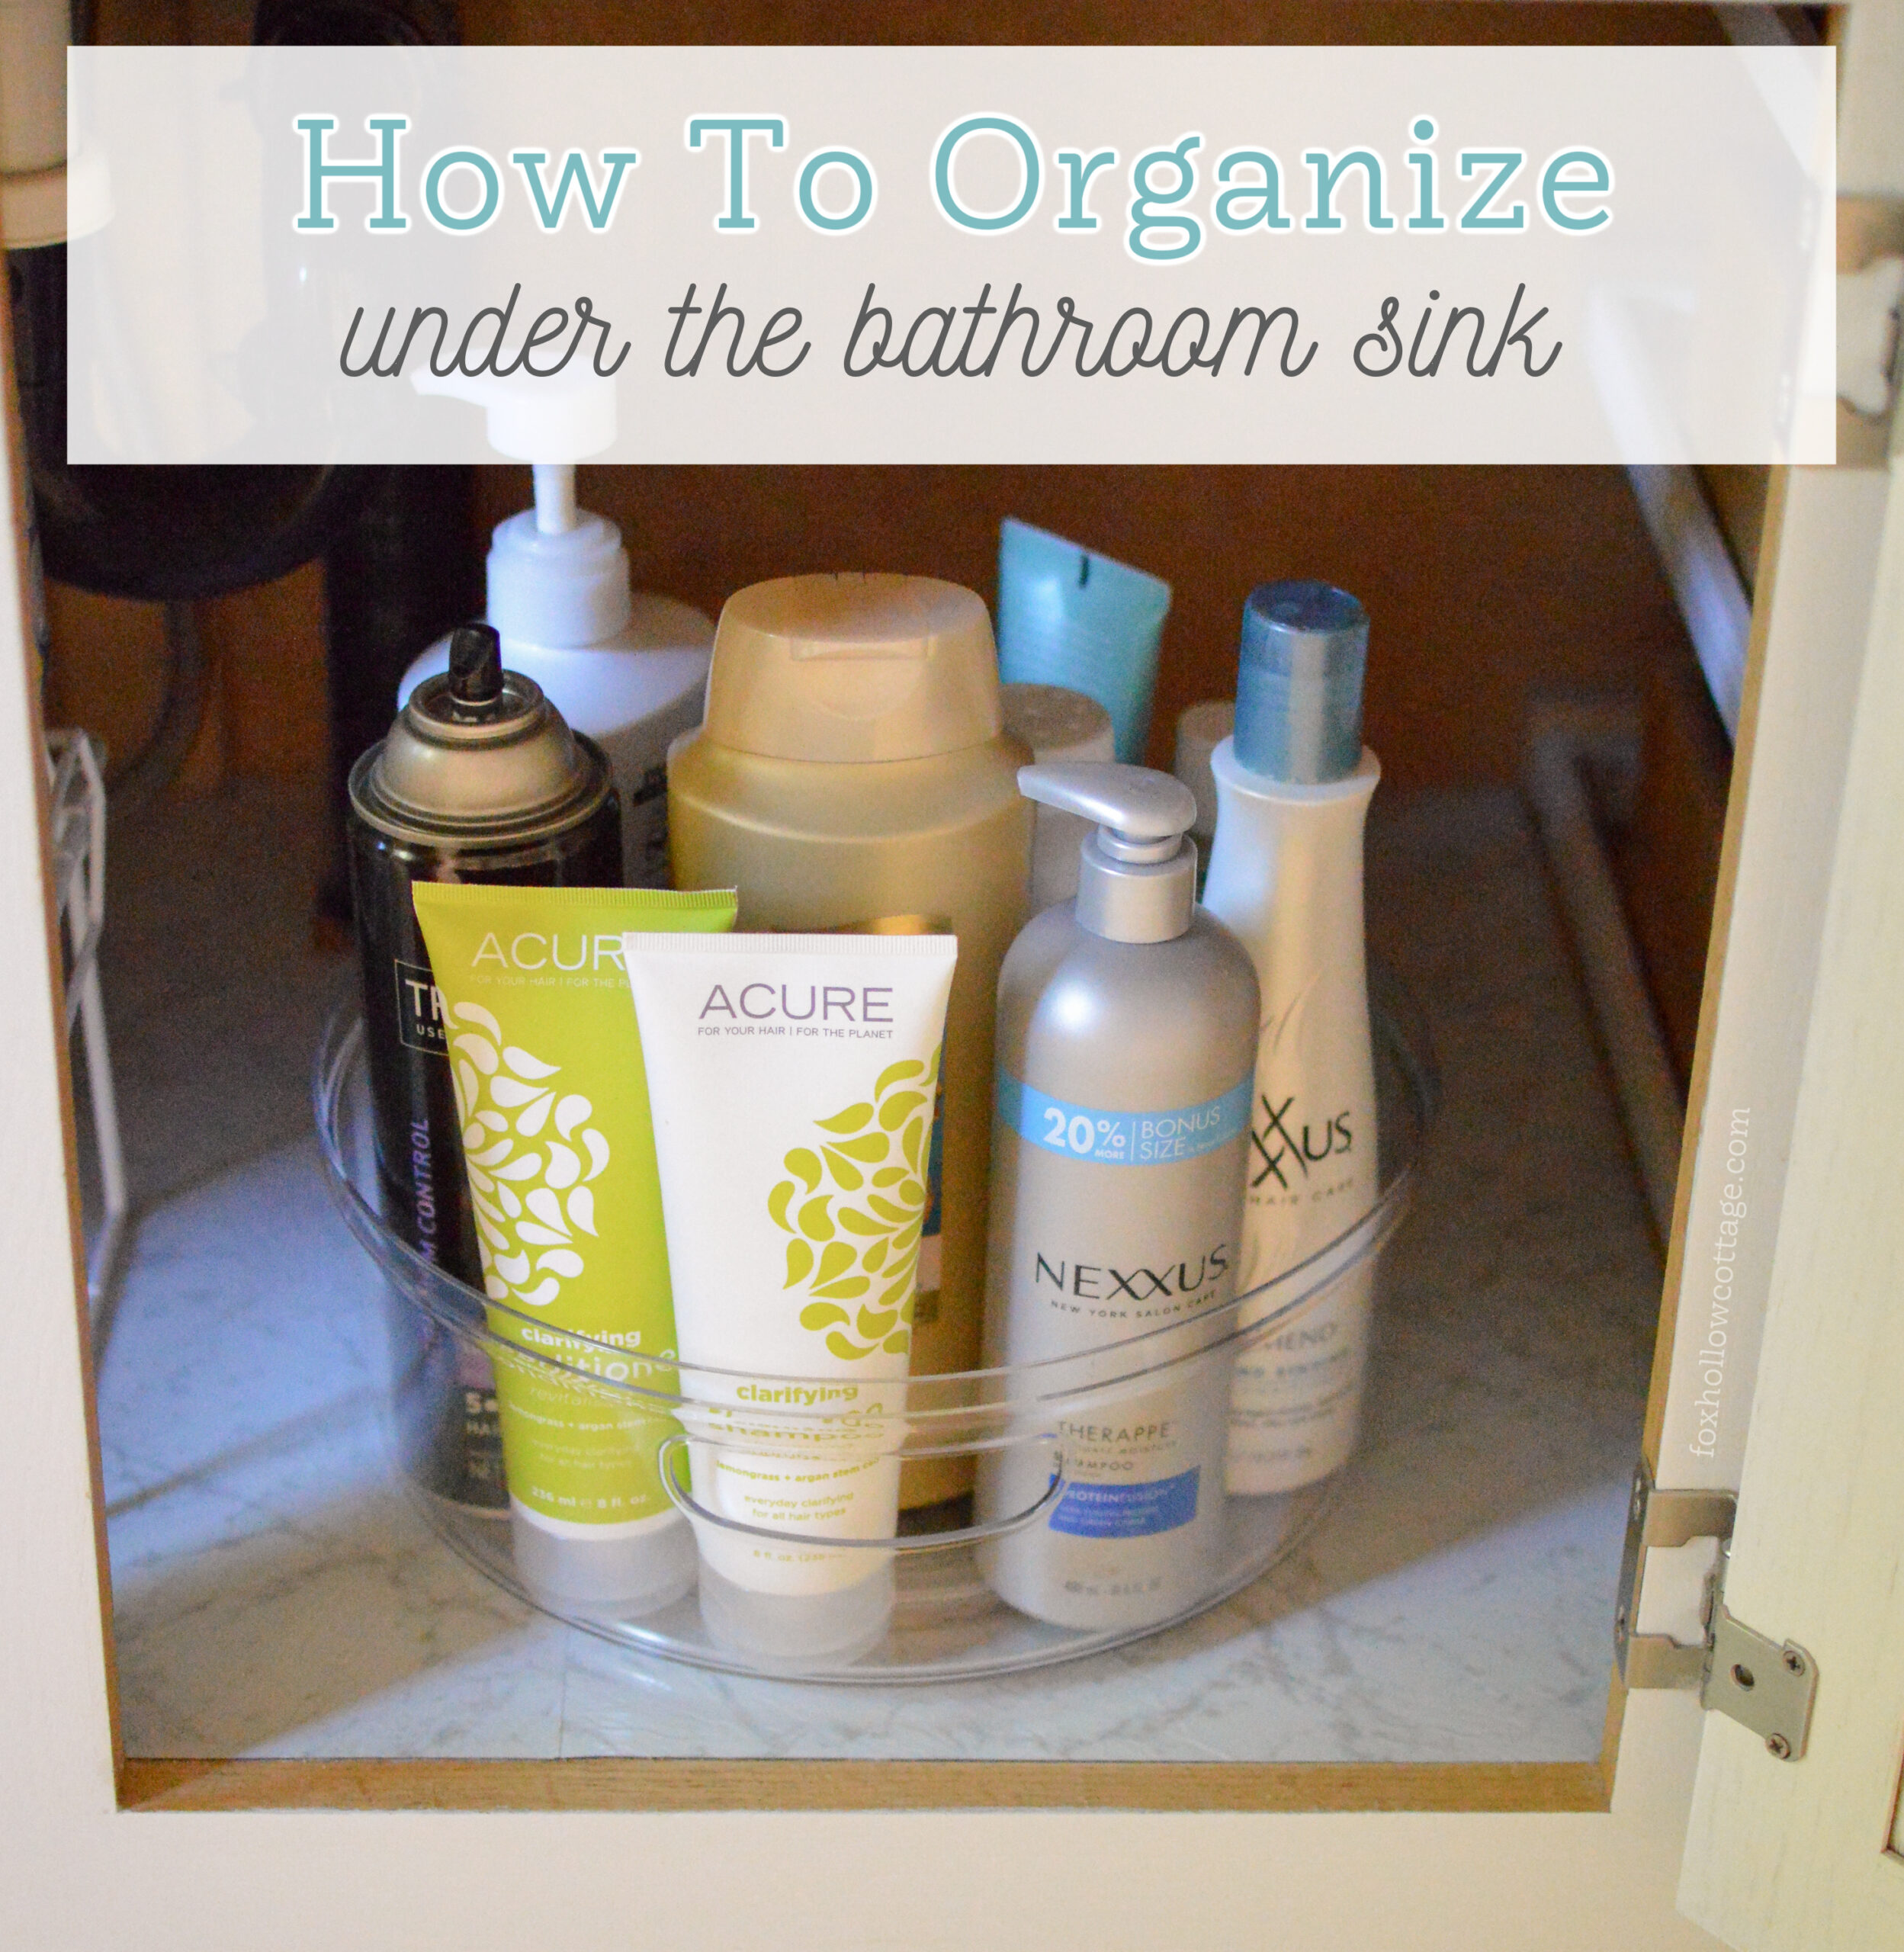 https://foxhollowcottage.com/wp-content/uploads/2021/01/How-to-organize-under-the-bathroom-sink-Simple-tips-ideas-month-long-weekly-Cleaning-Organizing-event-with-Free-Printable-checklist-www.foxhollowcottage.com-bathroom-organizing-scaled.jpg